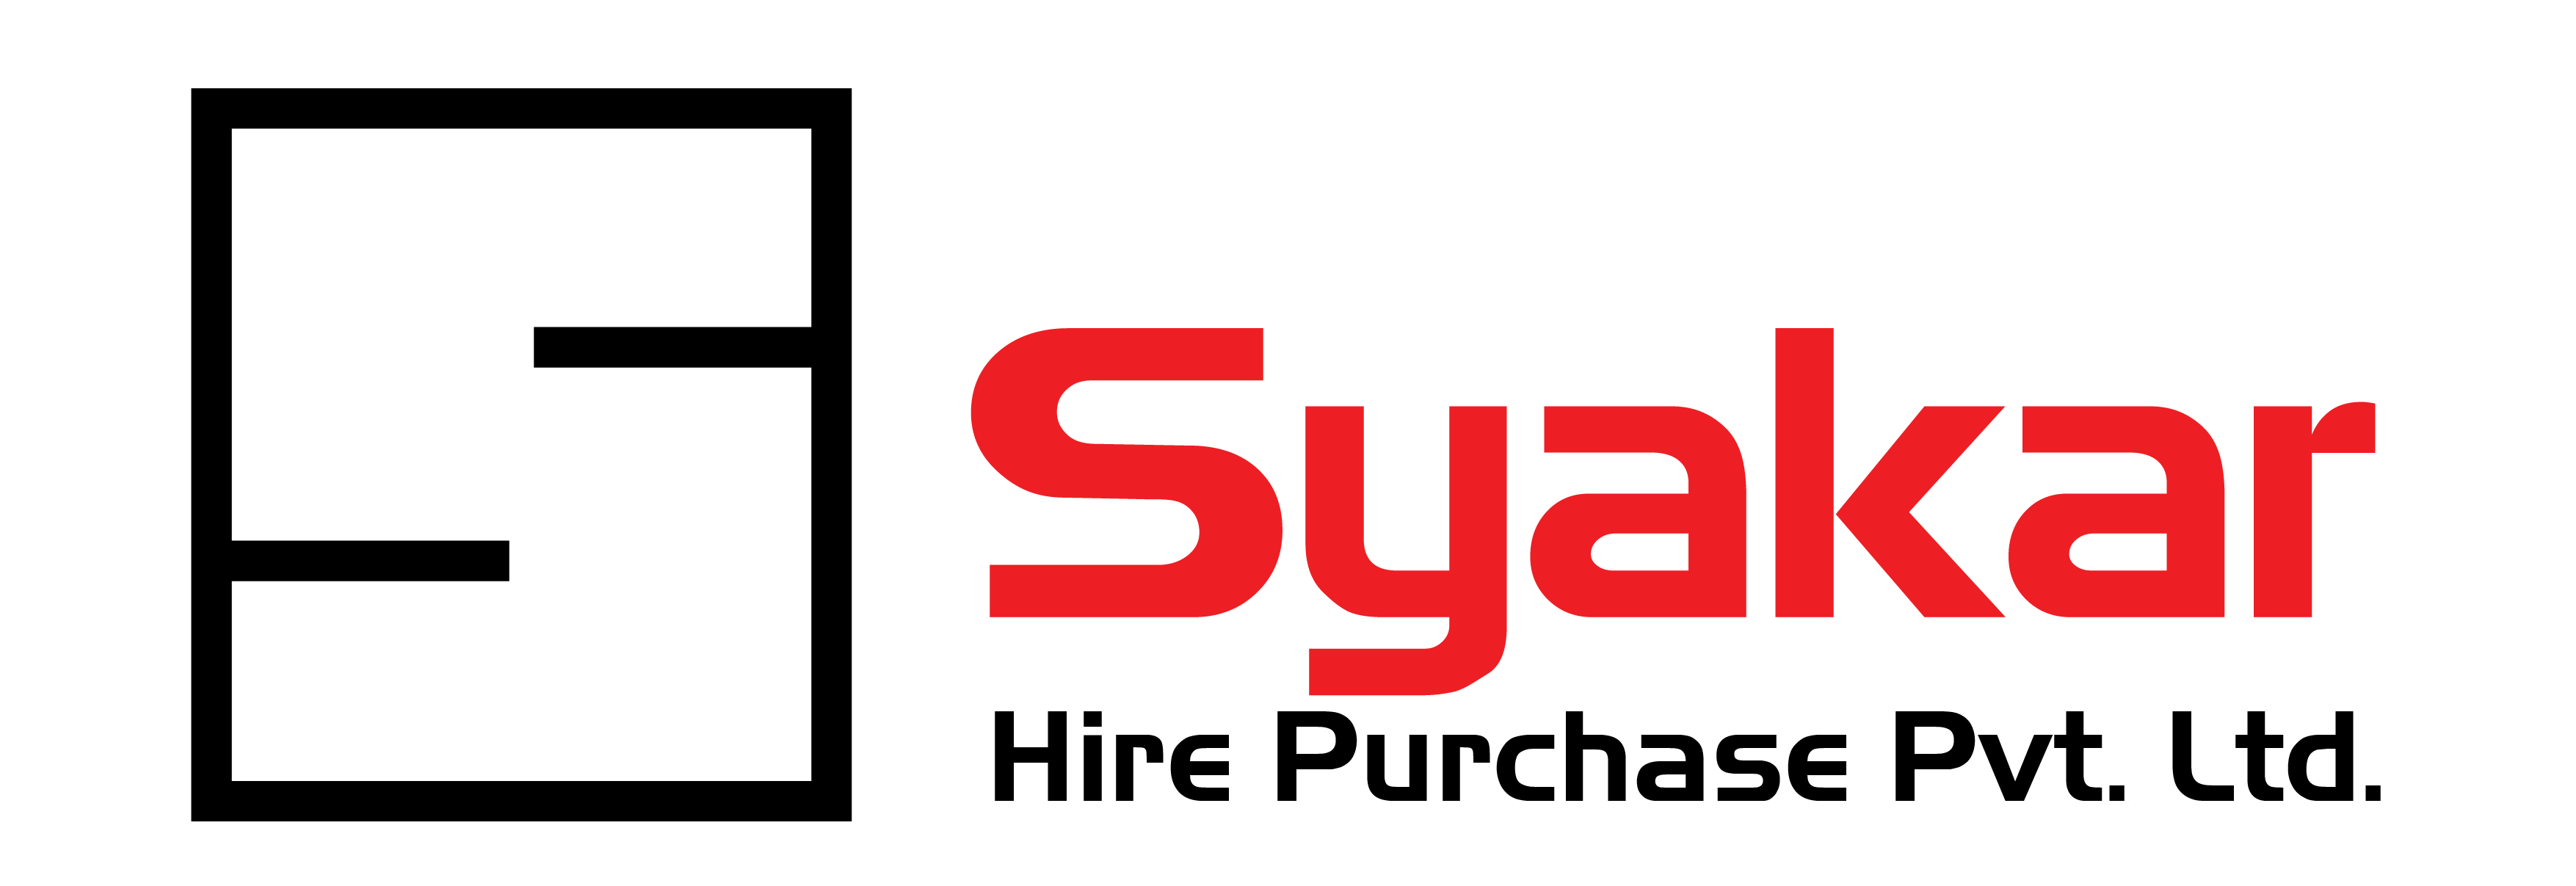 Spykar appoints Zenith to handle media | Media | Campaign India